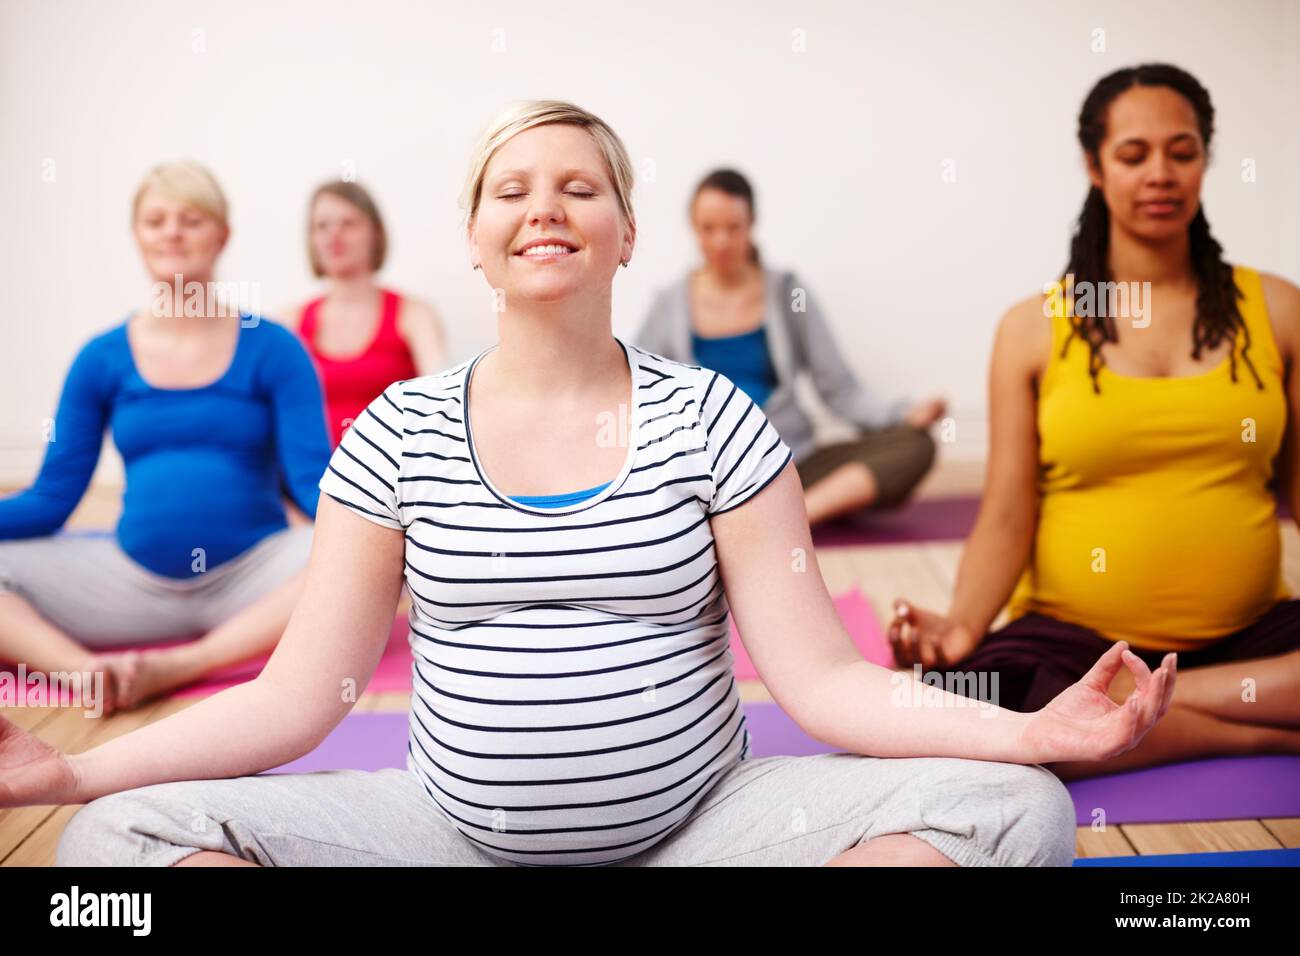 Meditating on motherhood. A multi-ethnic group of pregnant women meditating in a yoga class. Stock Photo